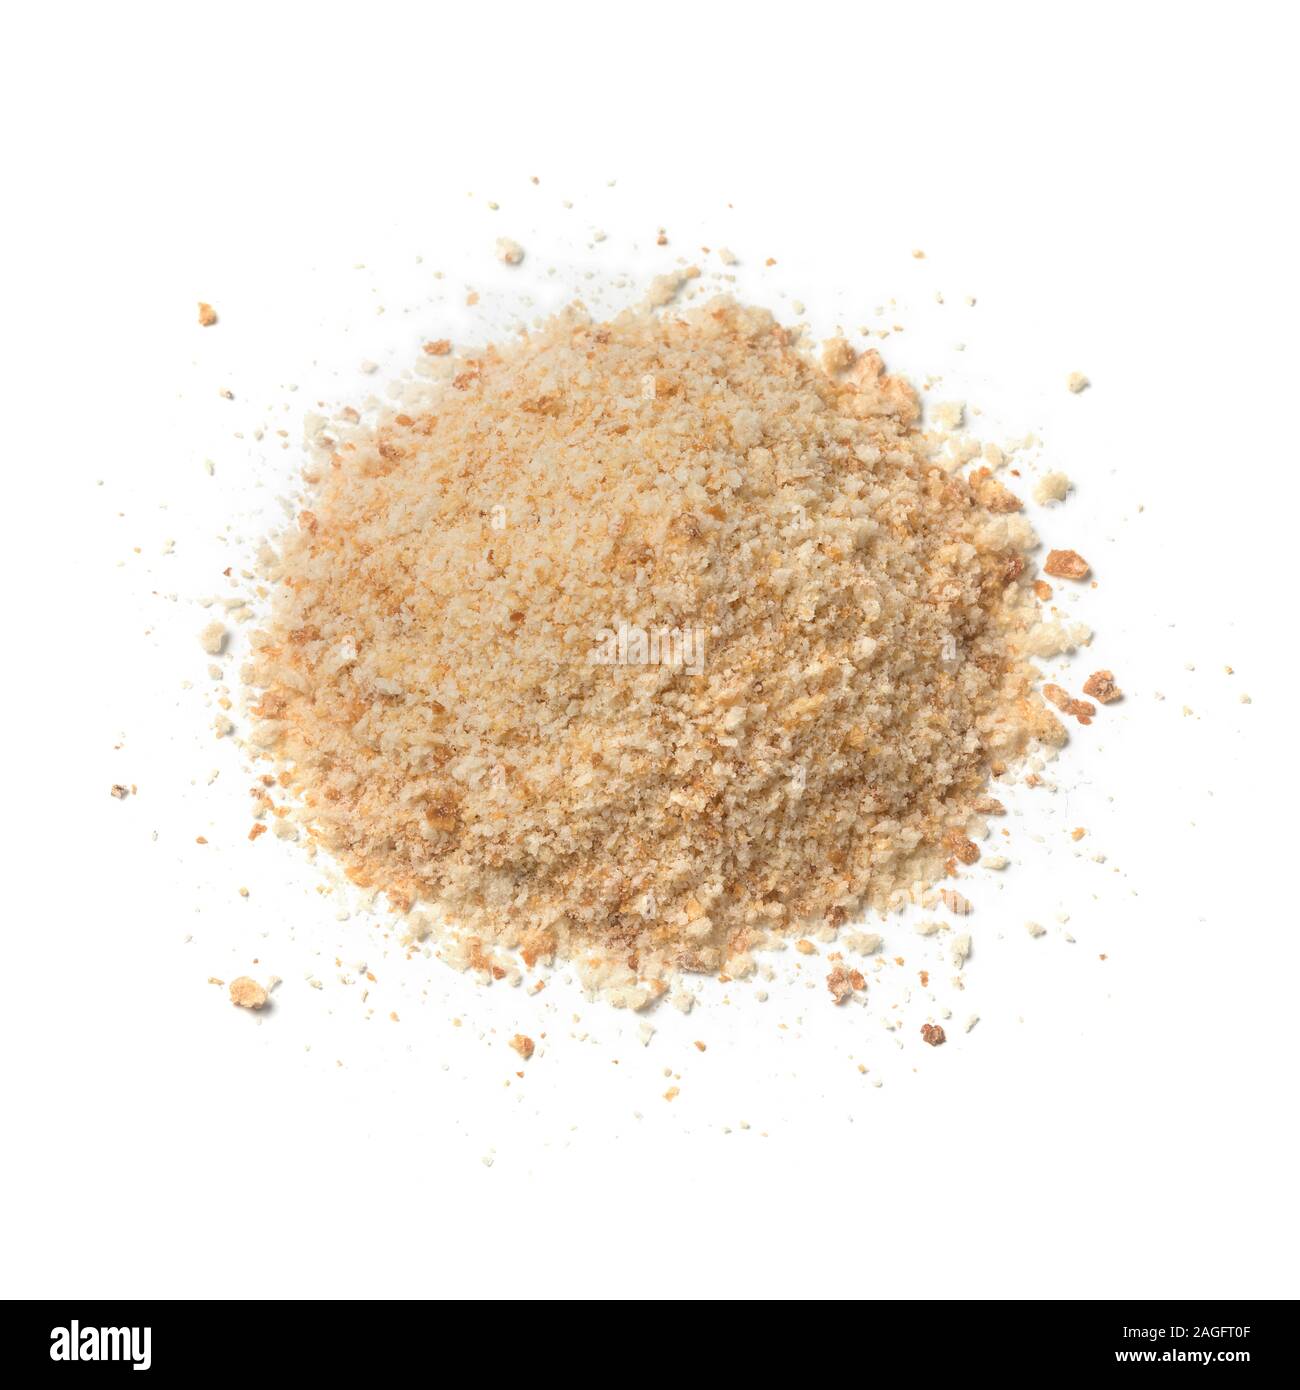 Heap of  bread crumbs isolated on white background Stock Photo